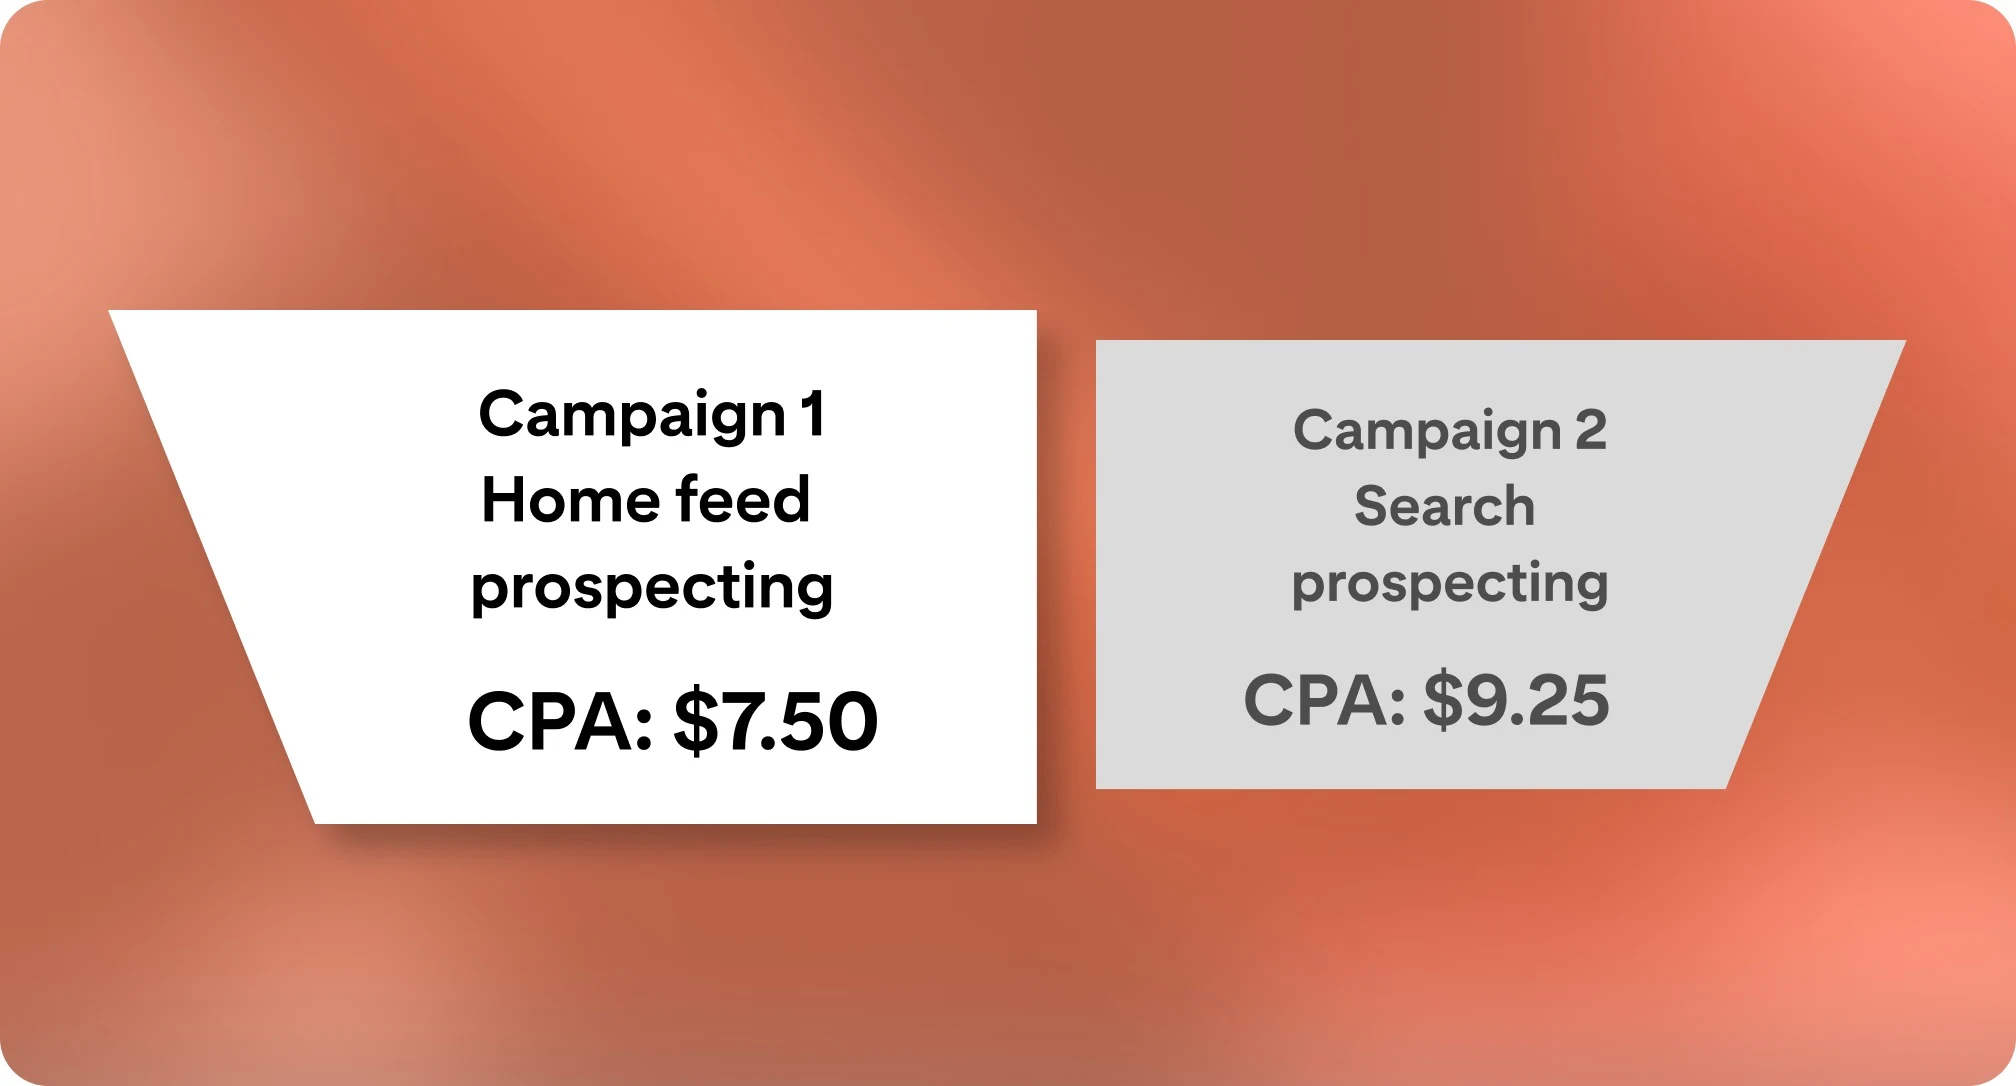 A side-by-side comparison of two campaigns, campaign 1 is highlighted and labeled as the winning campaign due to its lower cost per acquisition, while Campaign 2 is subtly shaded in the background to symbolize lesser efficacy.